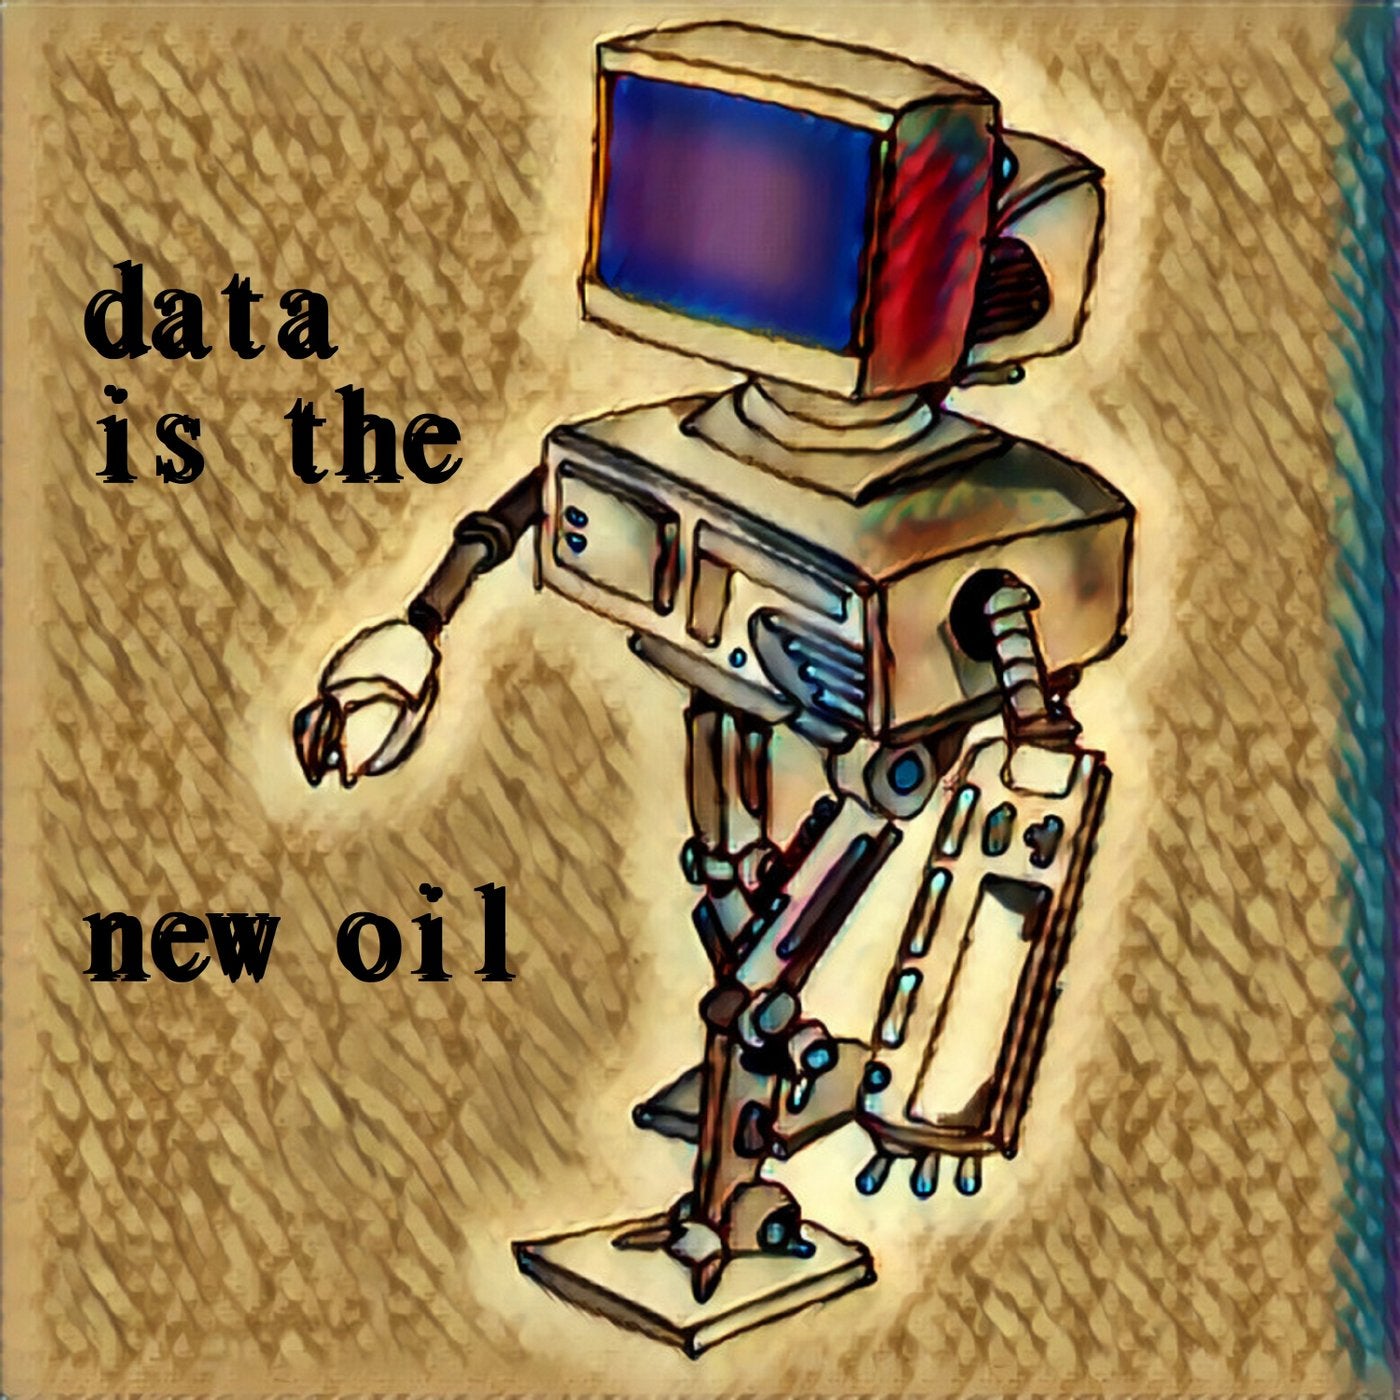 Data is the new oil